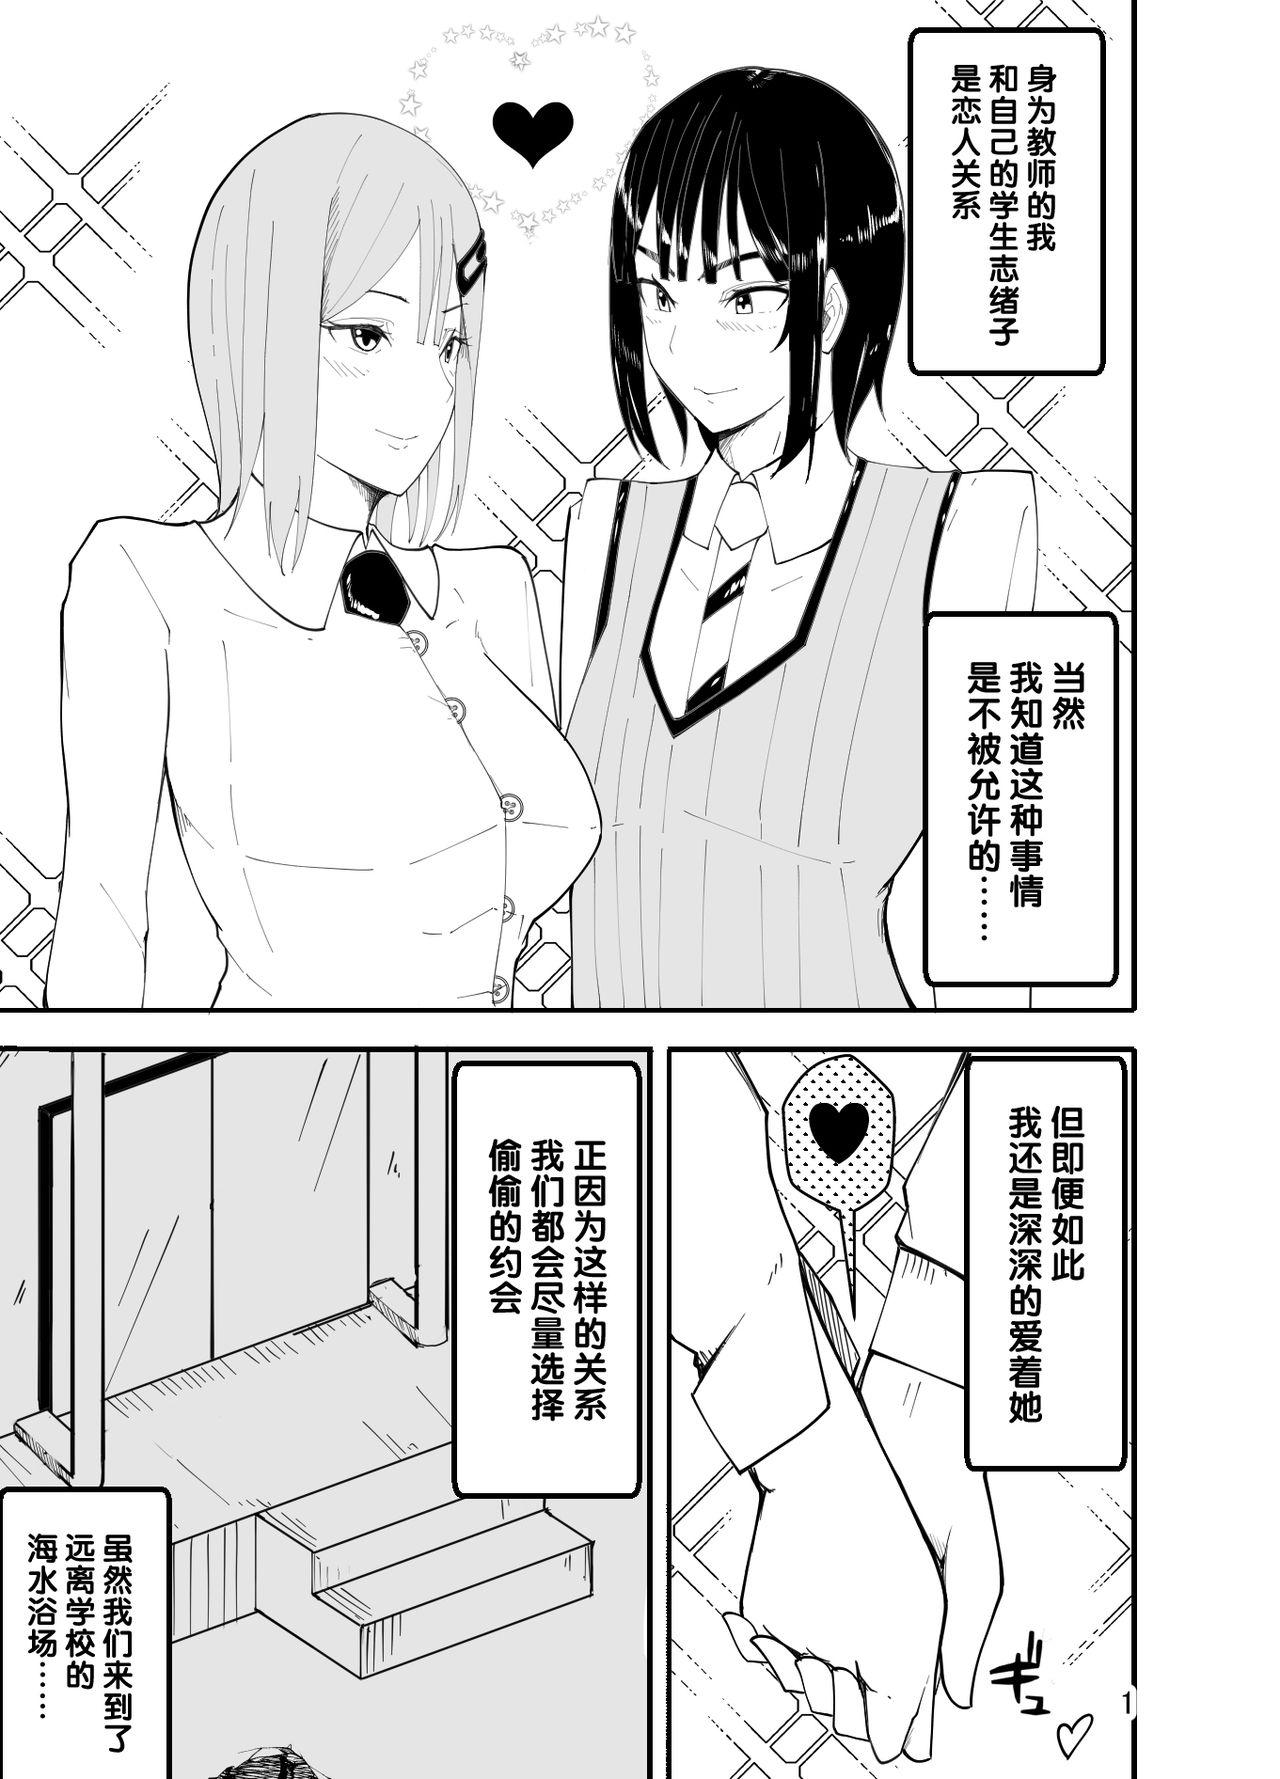 Pregnant 水着で女装！？先生イジリ！！（Chinese） Nut - Page 2